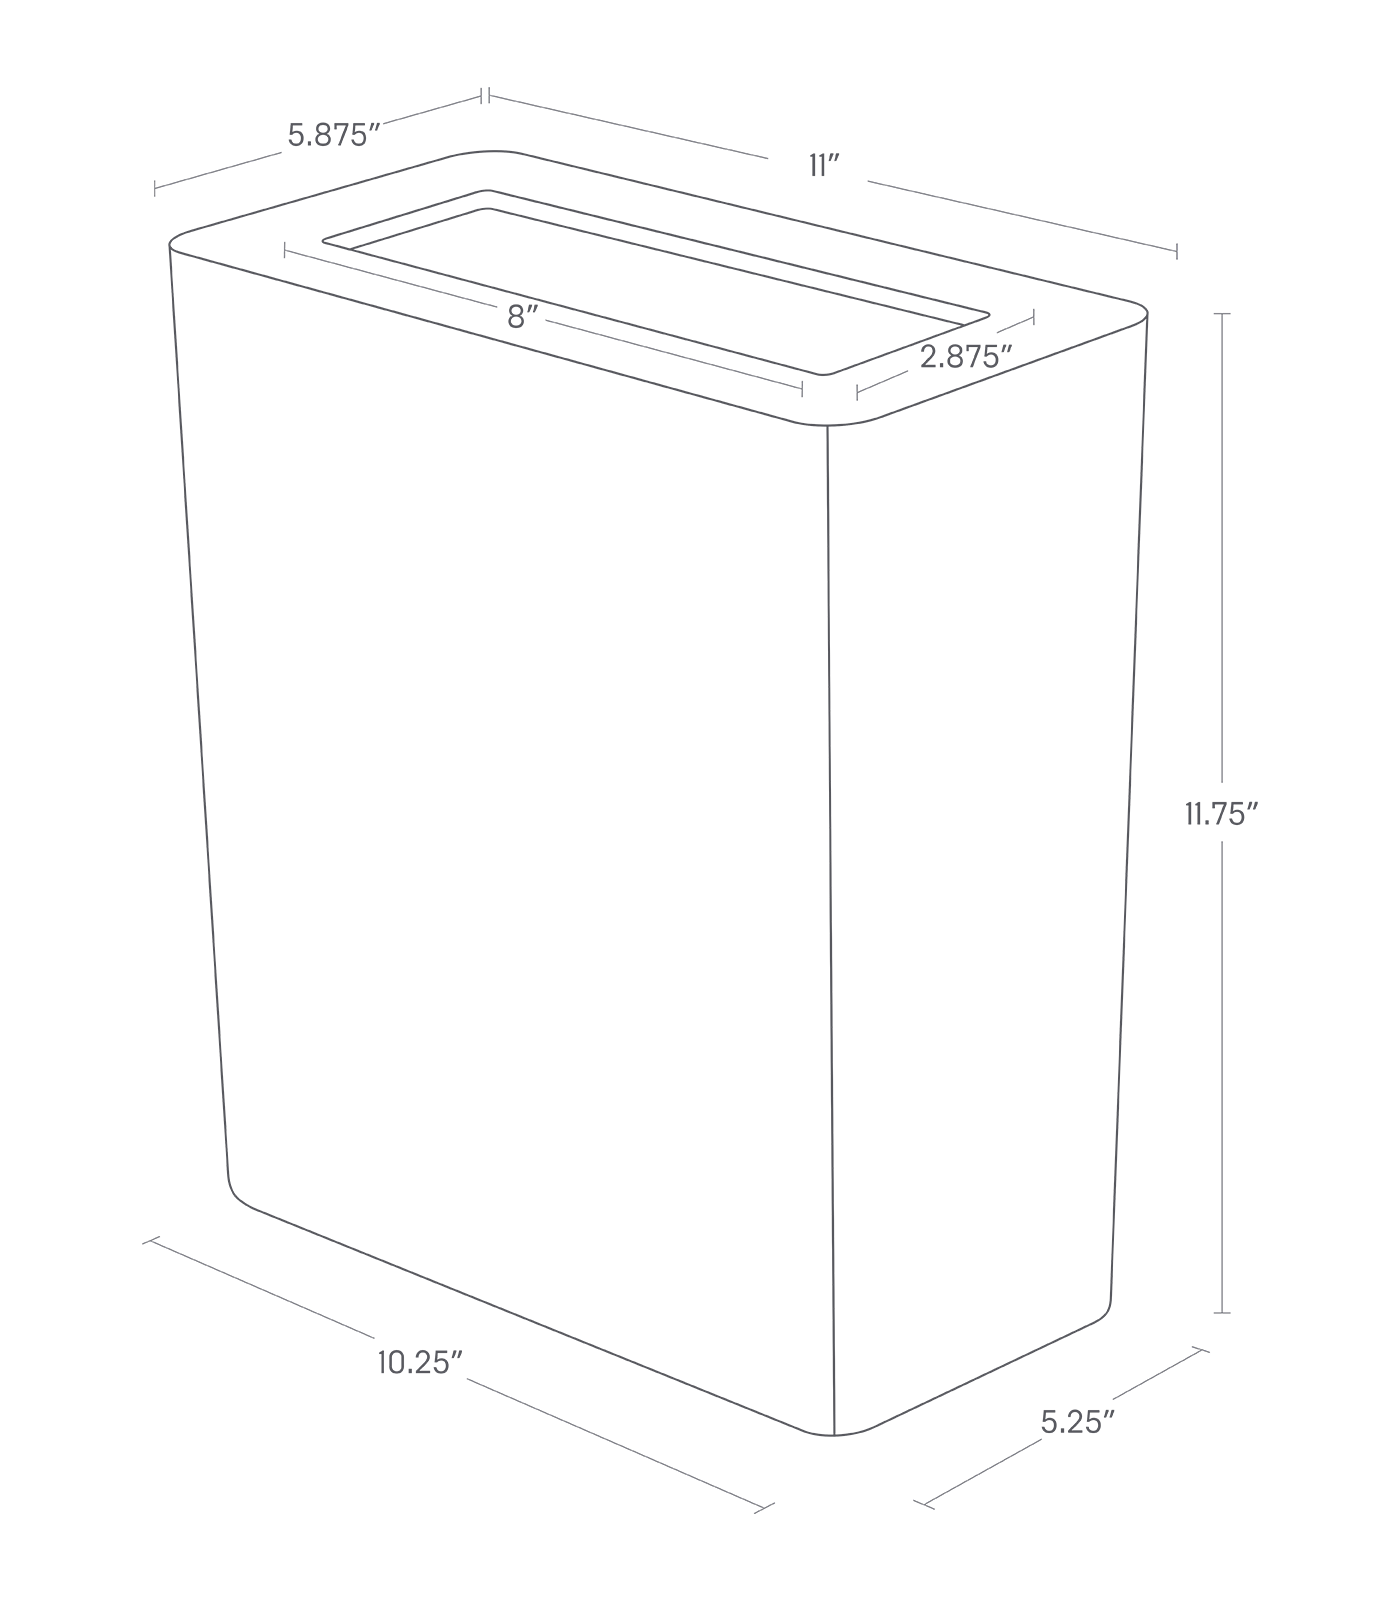 Dimension image for Trash Can - Two Styles on a white background including dimensions  L 5.91 x W 11.02 x H 11.81 inches